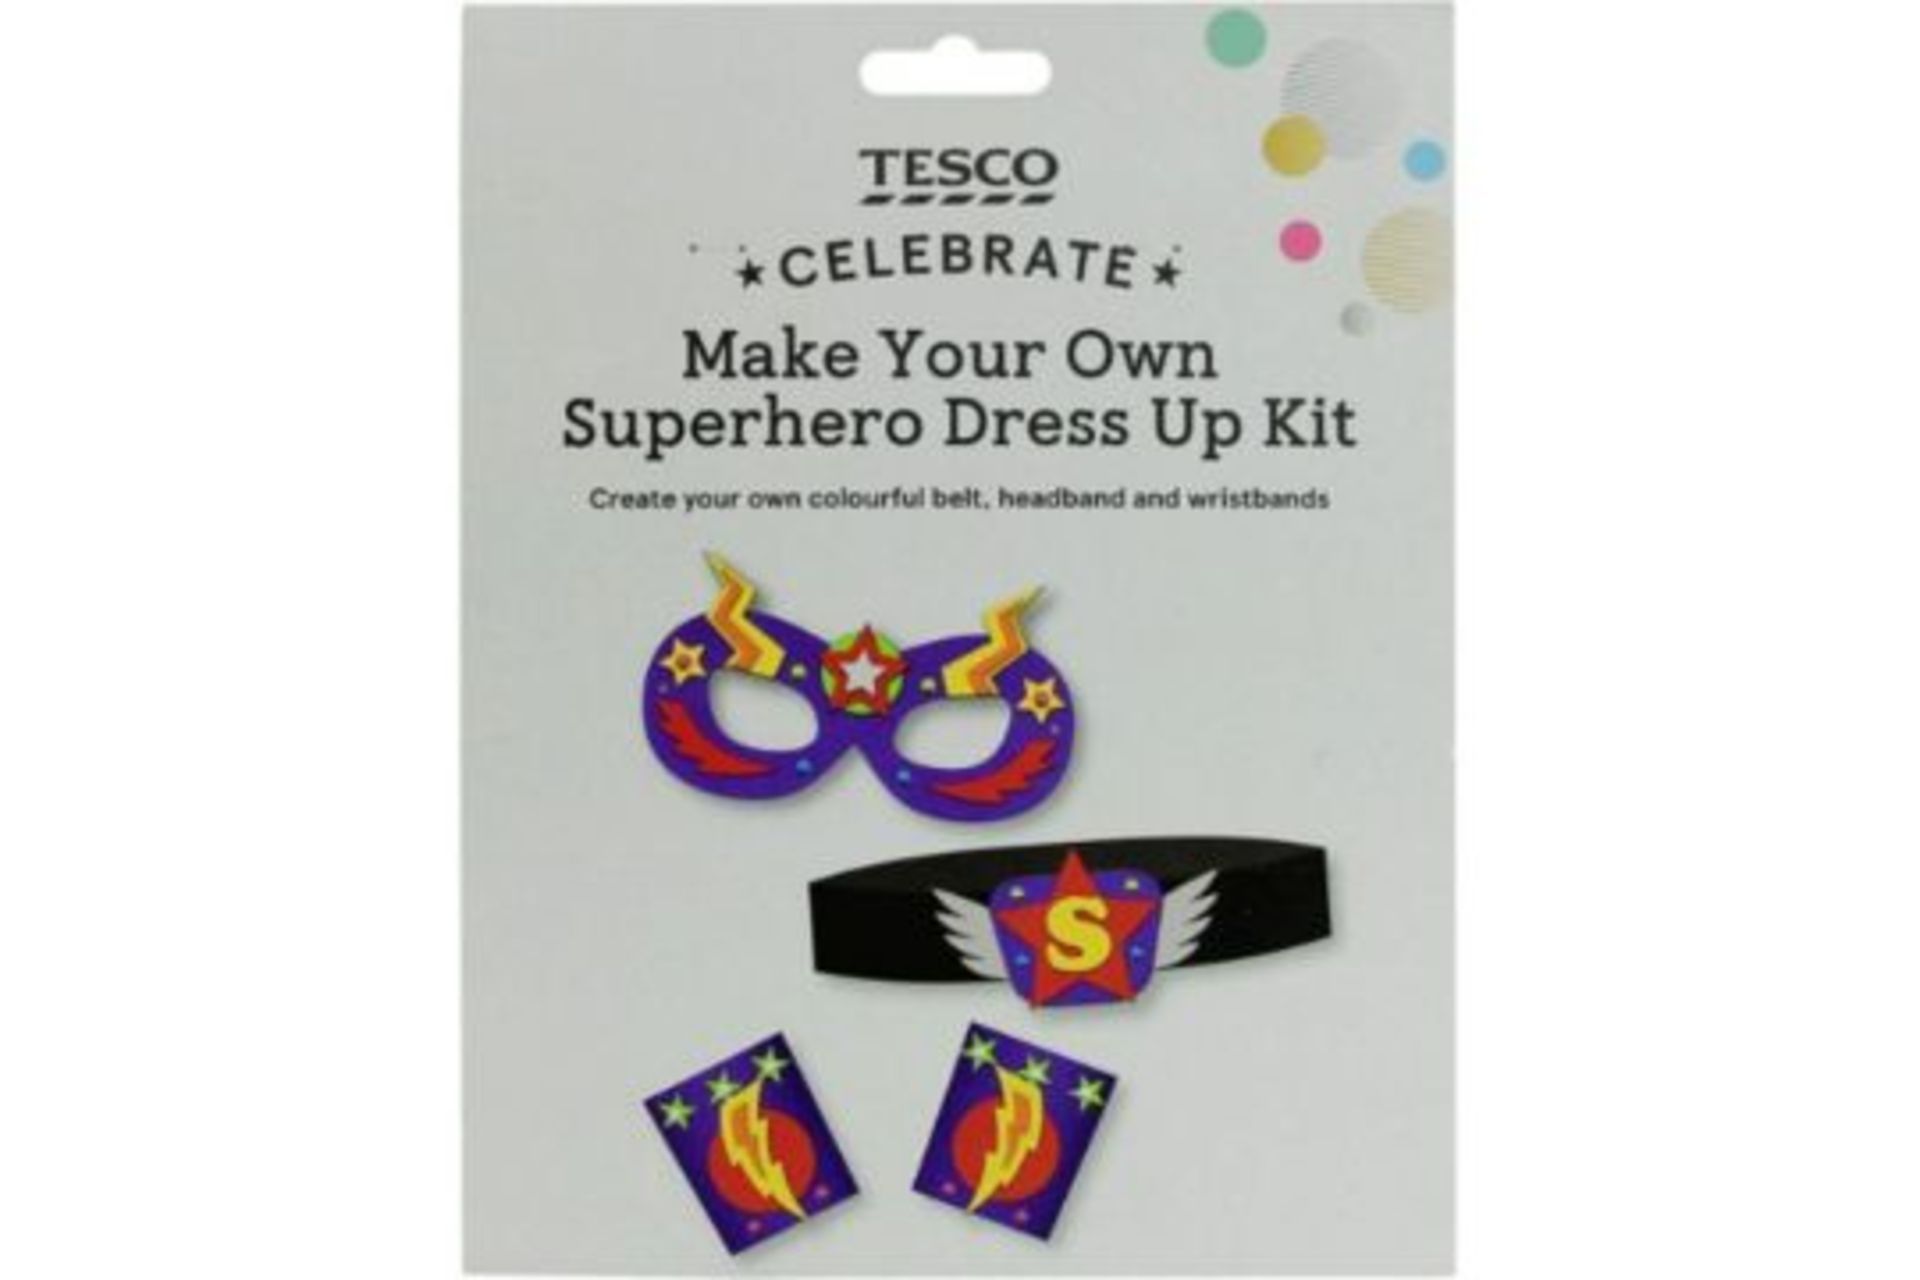 48 X NEW PACKAGED TESCO CELEBRATE MAKE YOUR OWN SUPER HERO DRESS UP KITS. INCLUDES BELT,